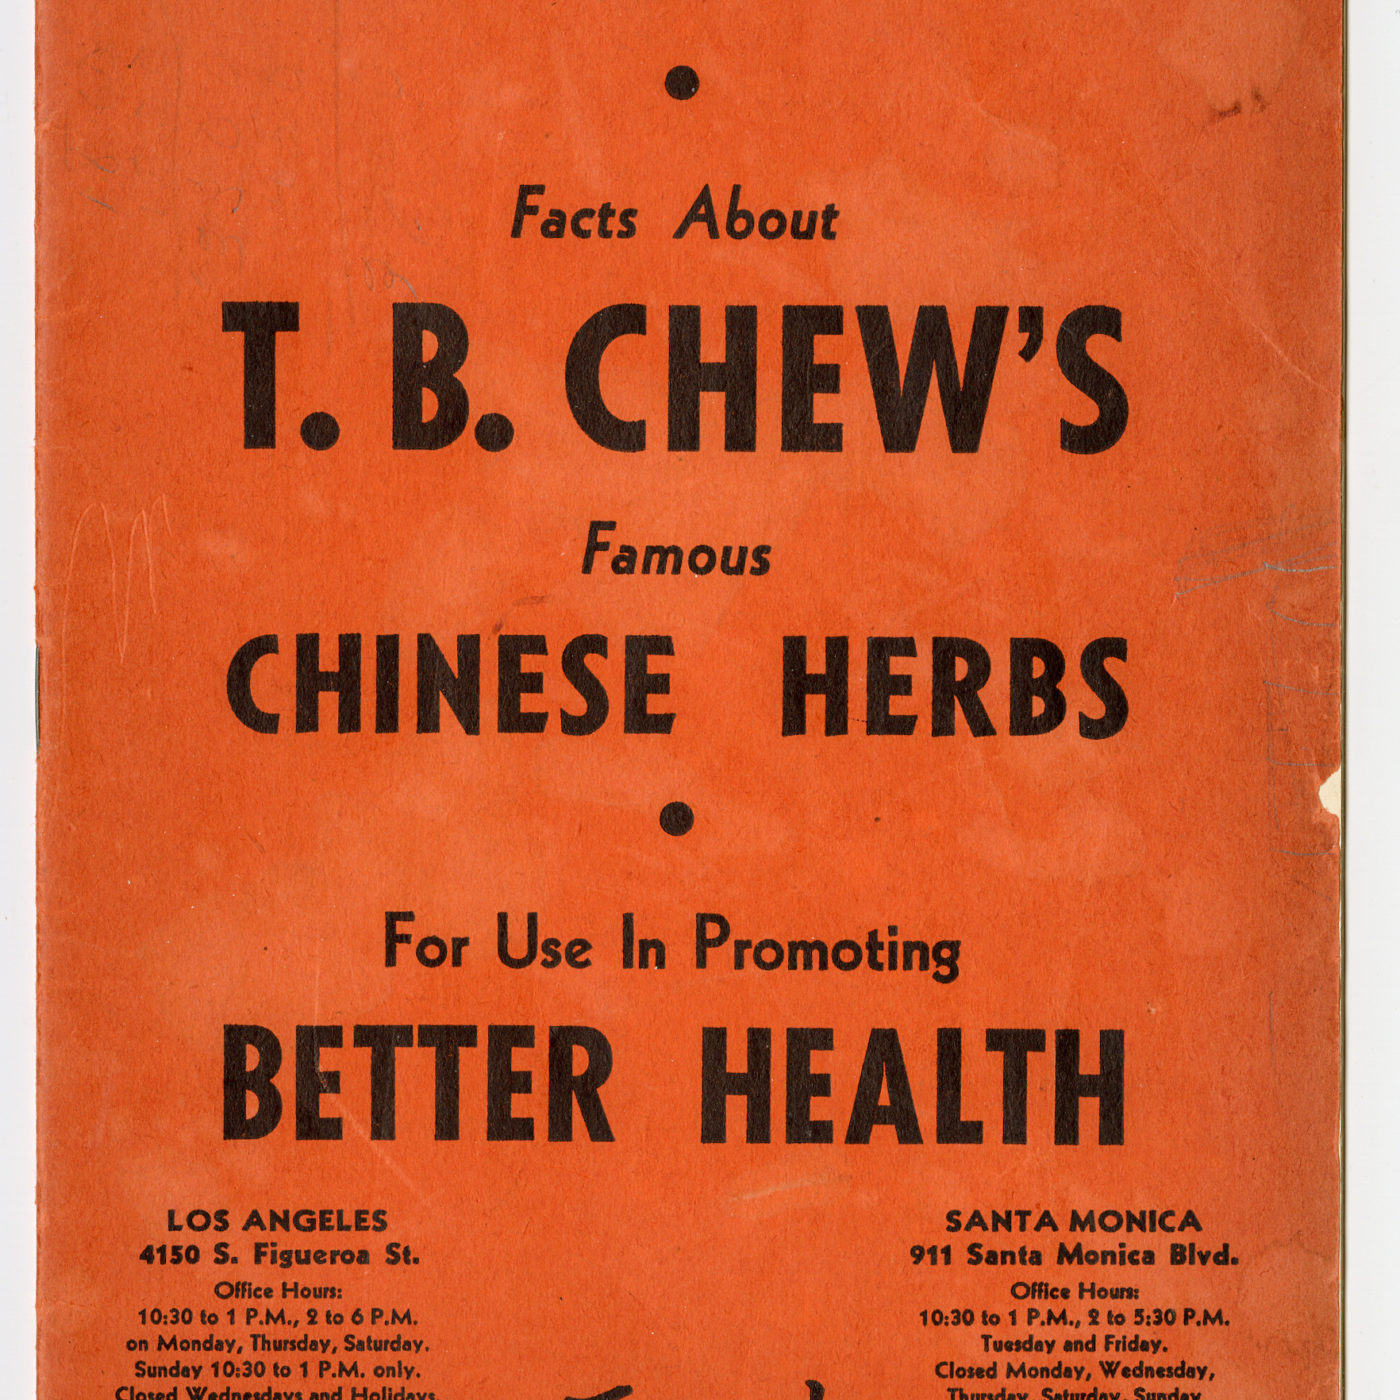 Facts About T.B. Chew's Famous Chinese Herbs Pamplet. Courtesy of Roy Delbyck, Museum of Chinese in America (MOCA) Collection.